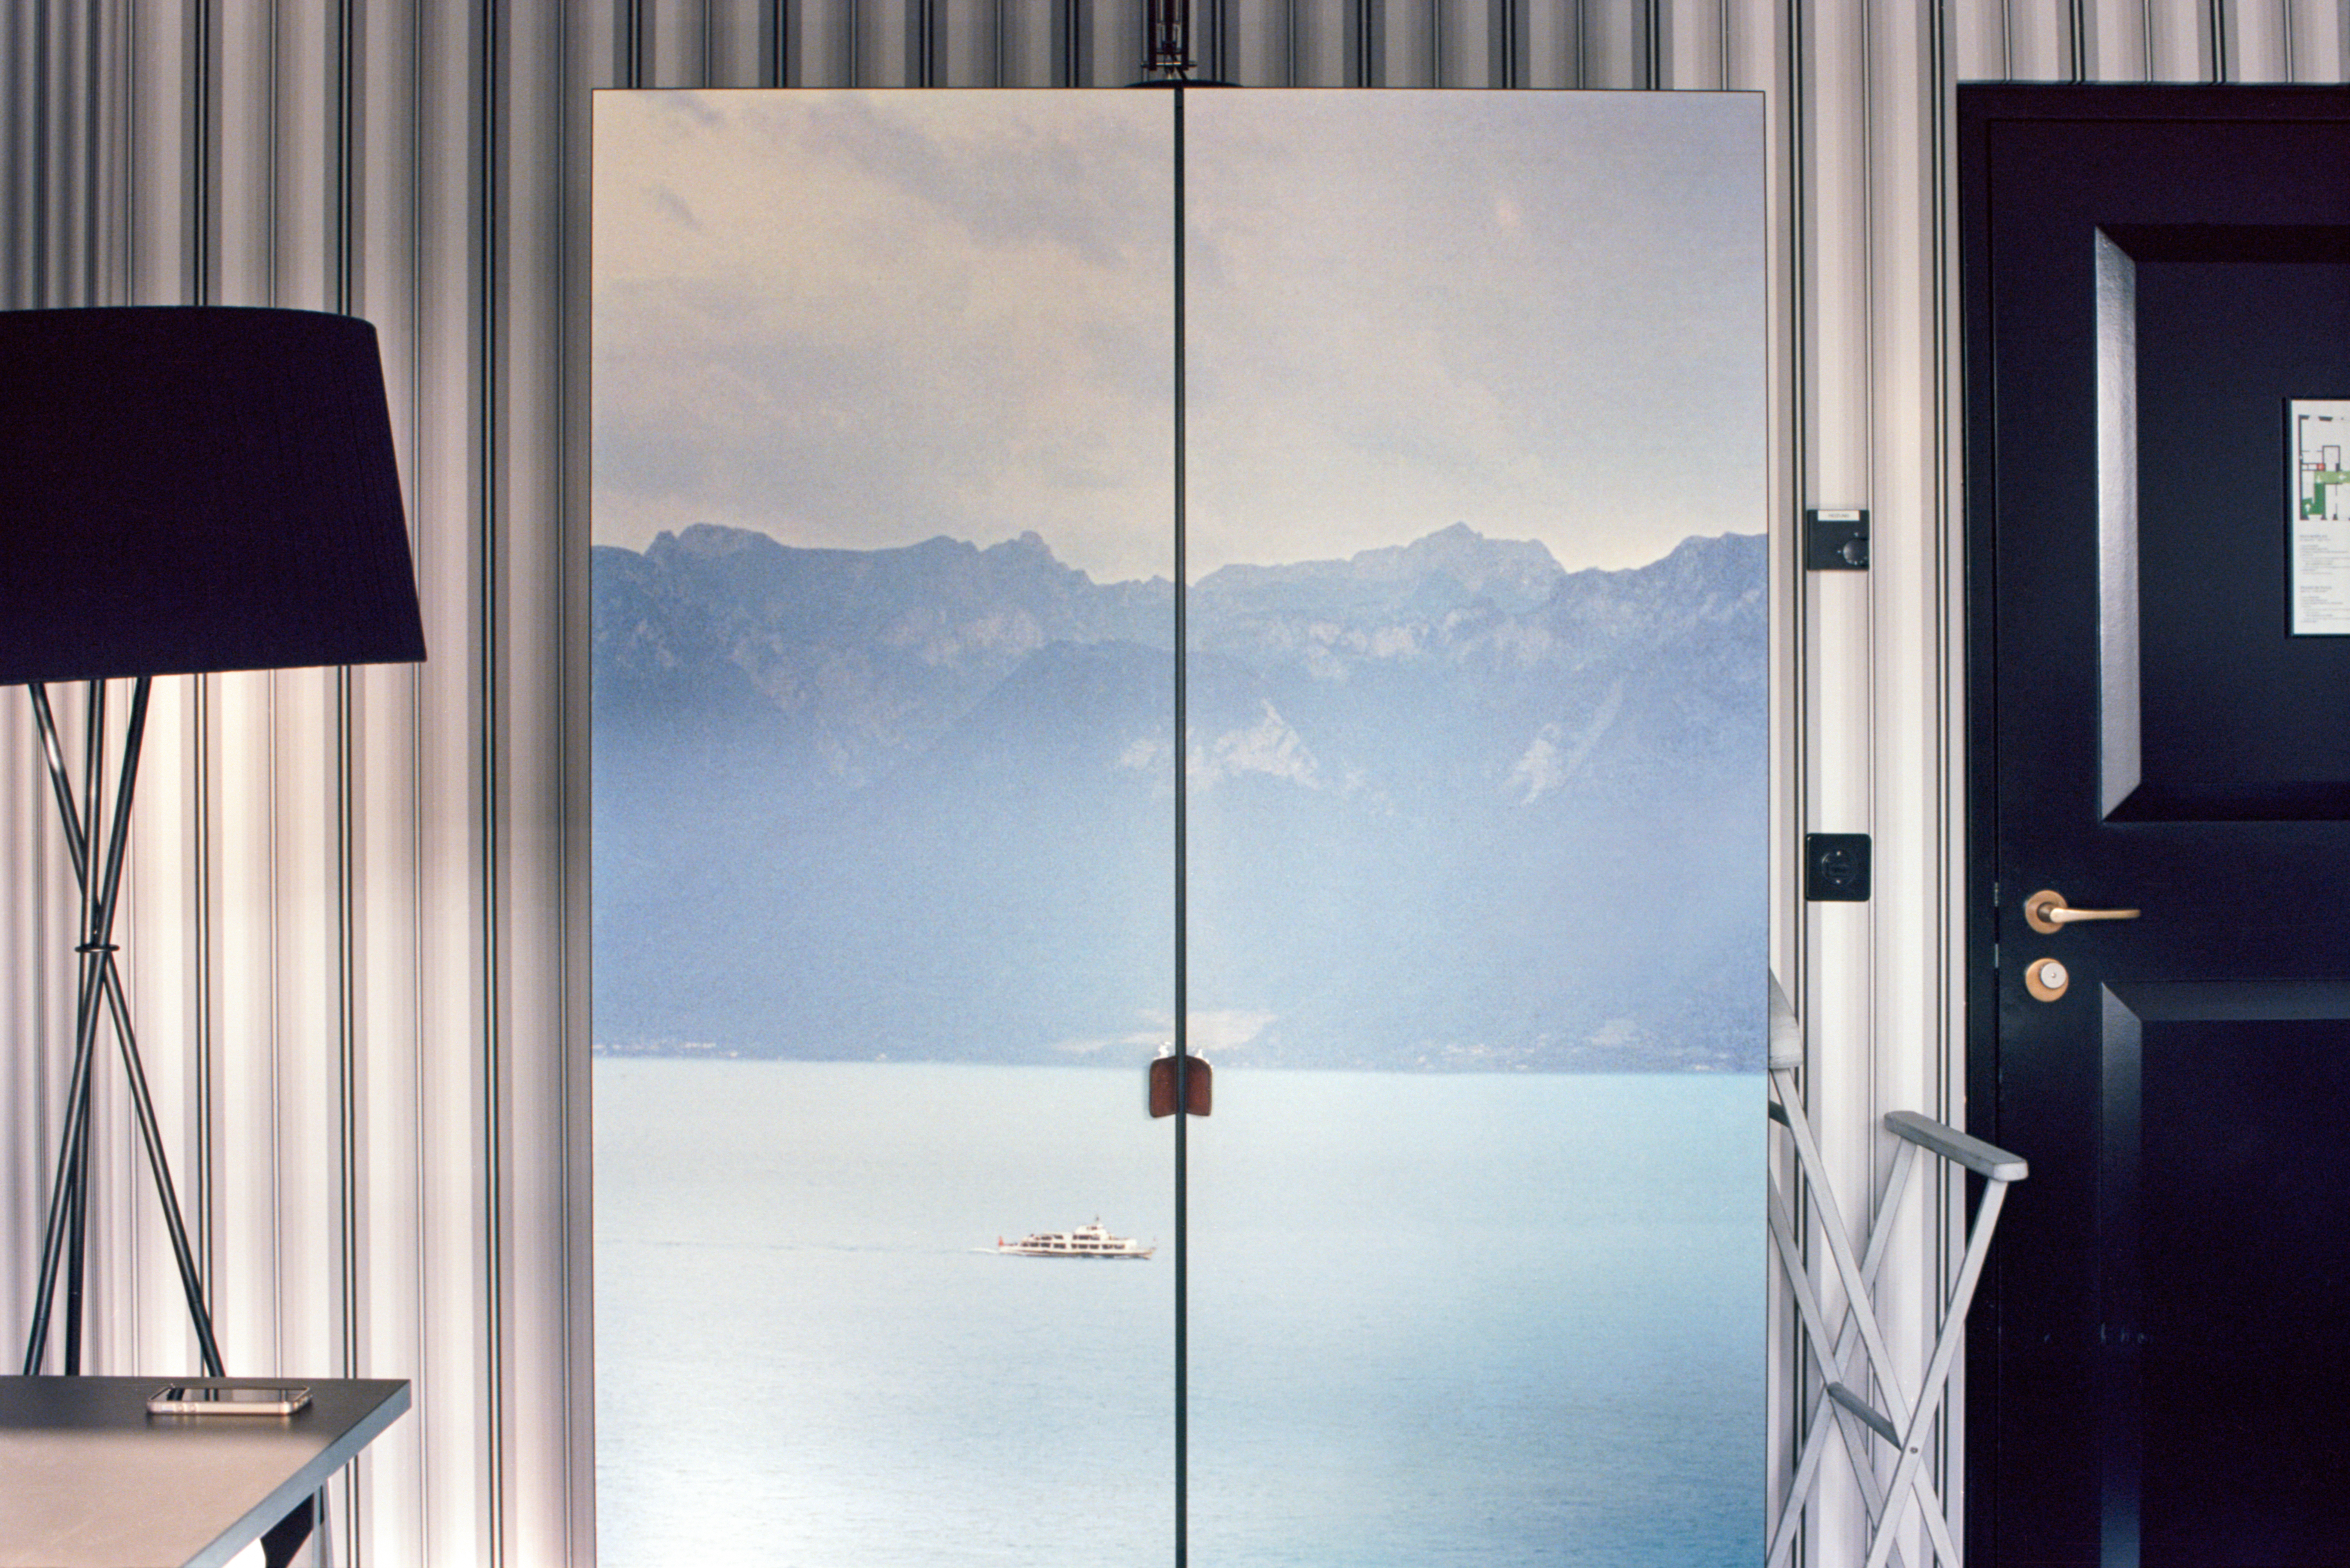 The view is what looks to be a beautiful view of the Swiss mountains behind Lake Zurich. But it is framed by a lamp and a door, and has door handles of its own. It is actually a wardrobe decorated completely by a photograph.